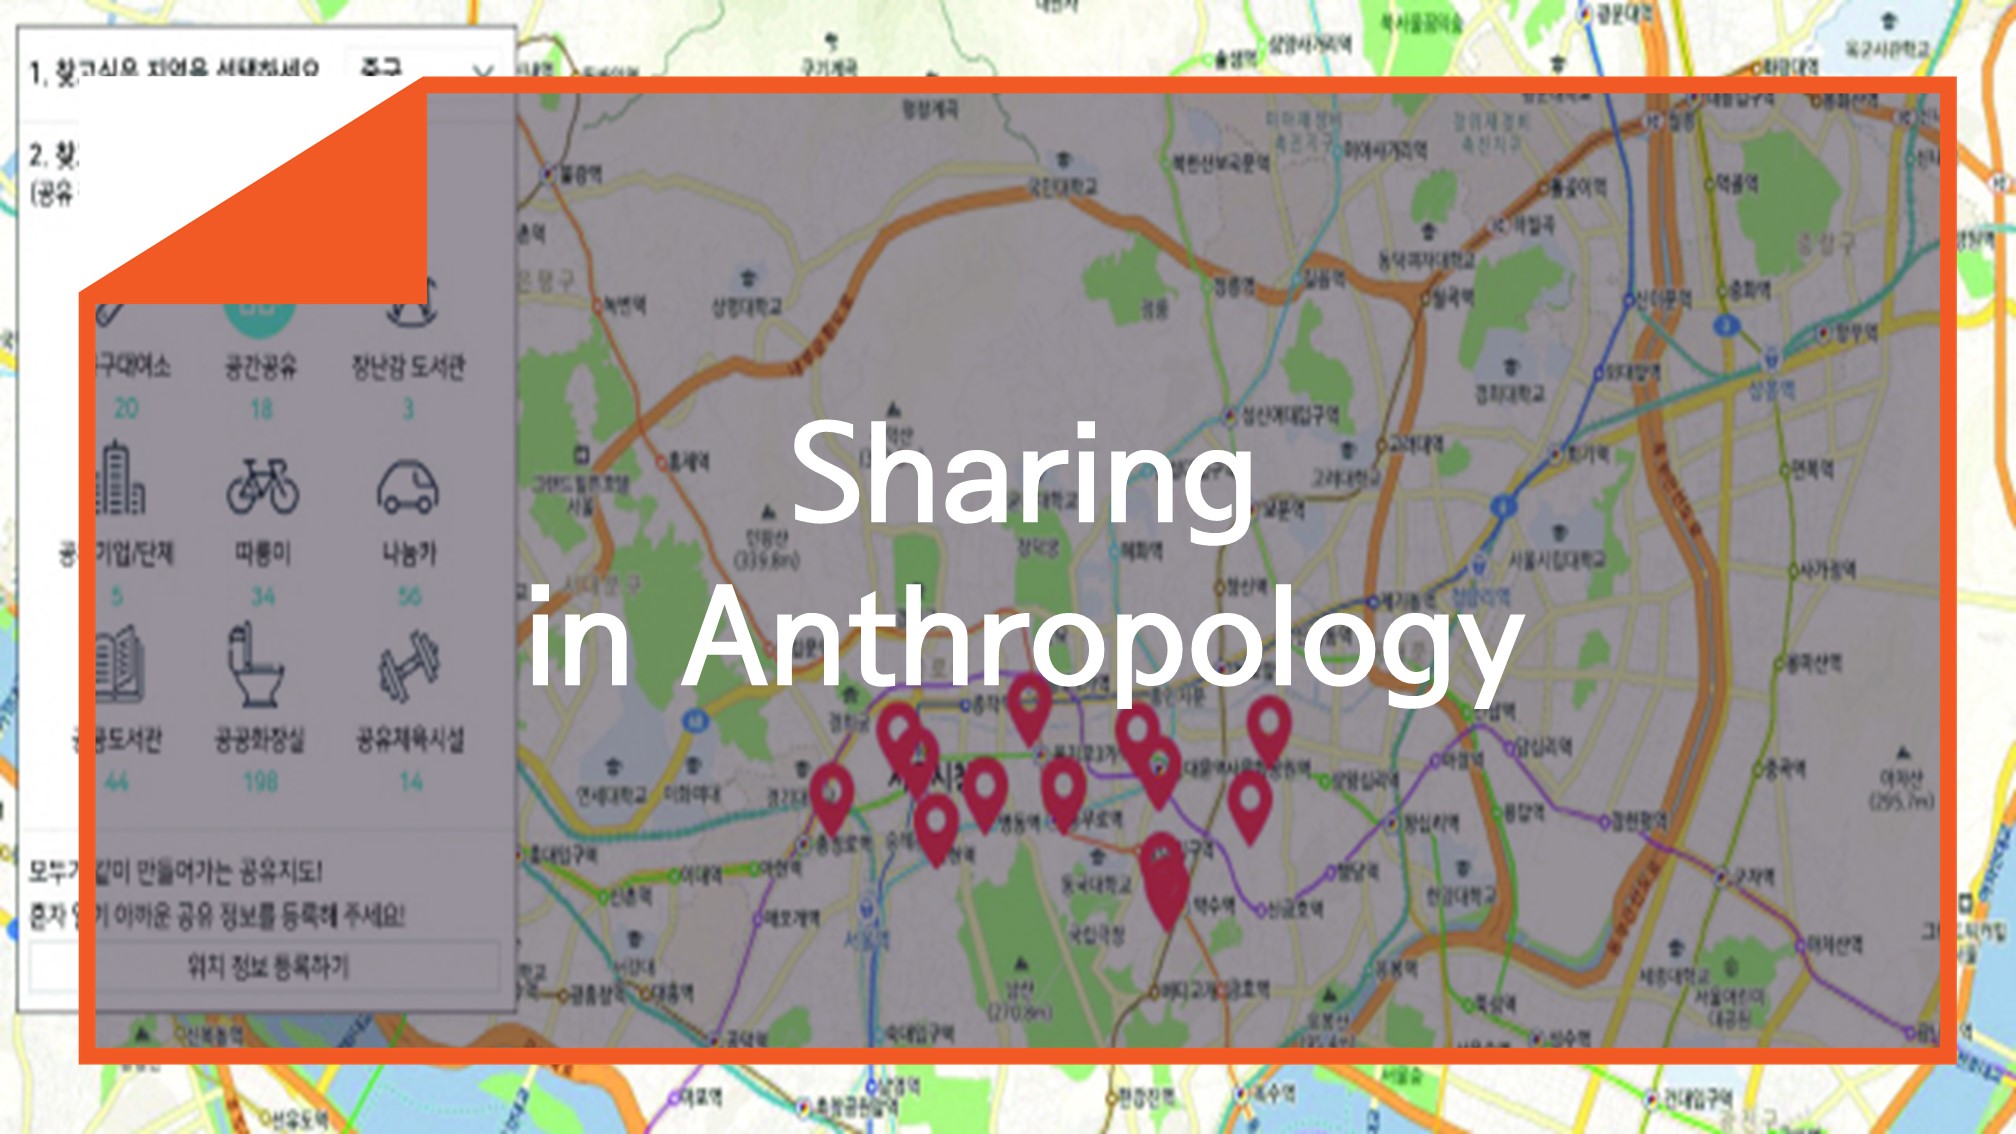 [Resources] Sharing in Anthropology